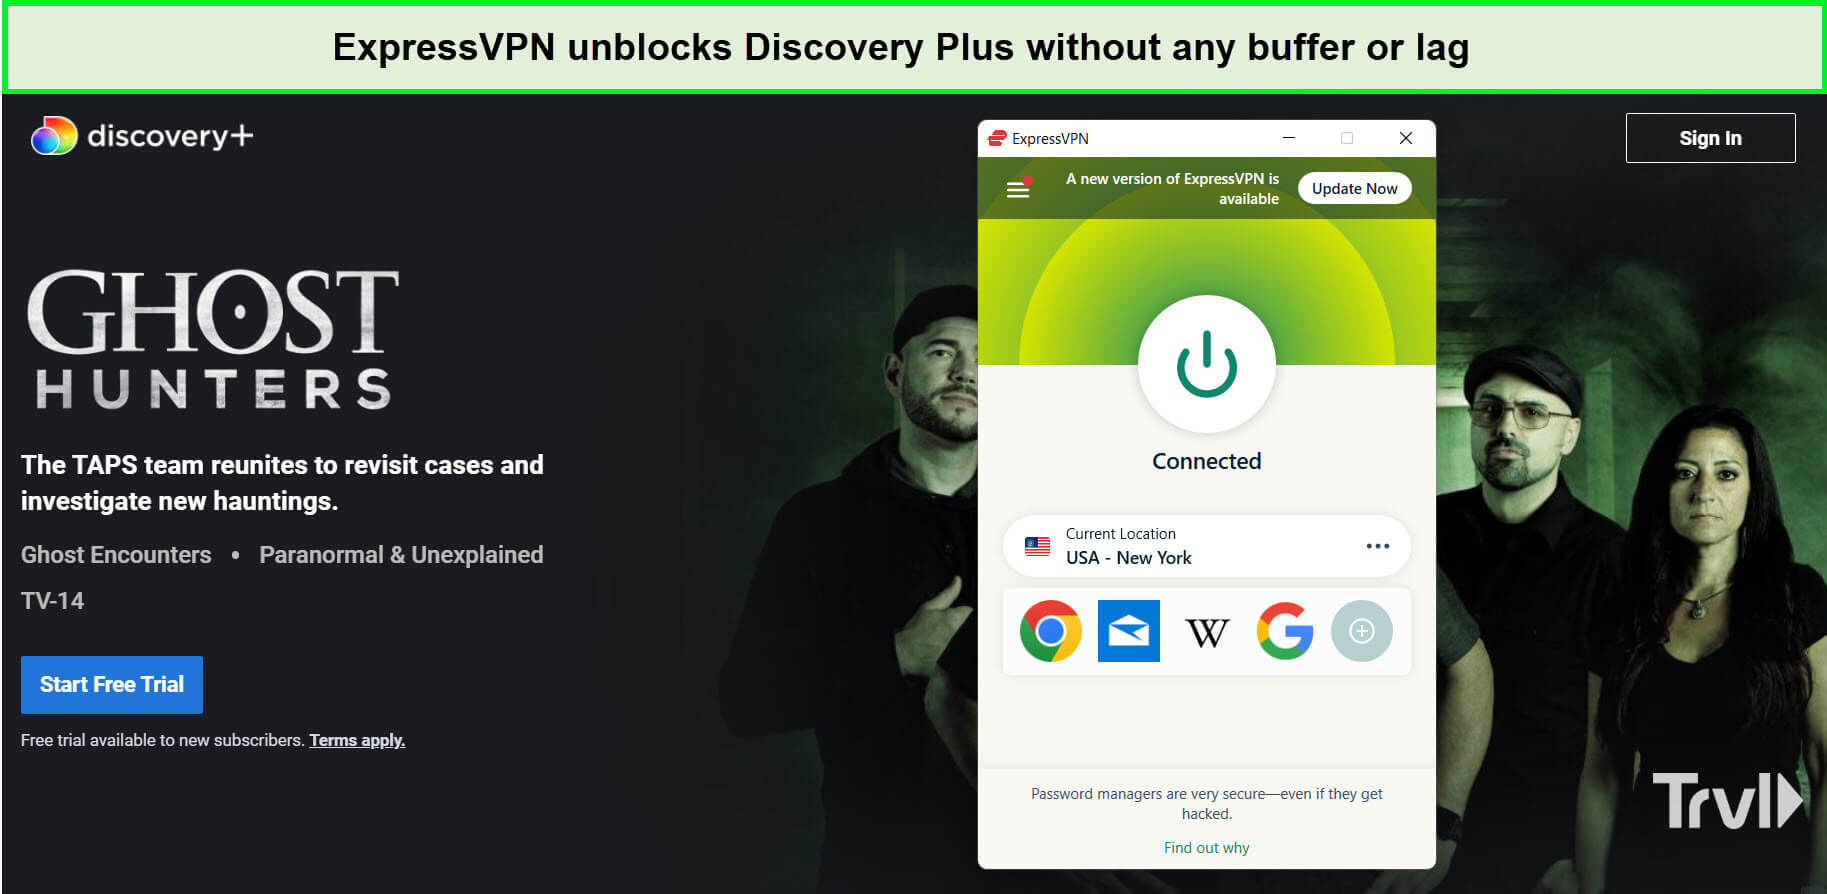 expressvpn-unblocks-ghost-hunters-on-discovery-plus-in-ca